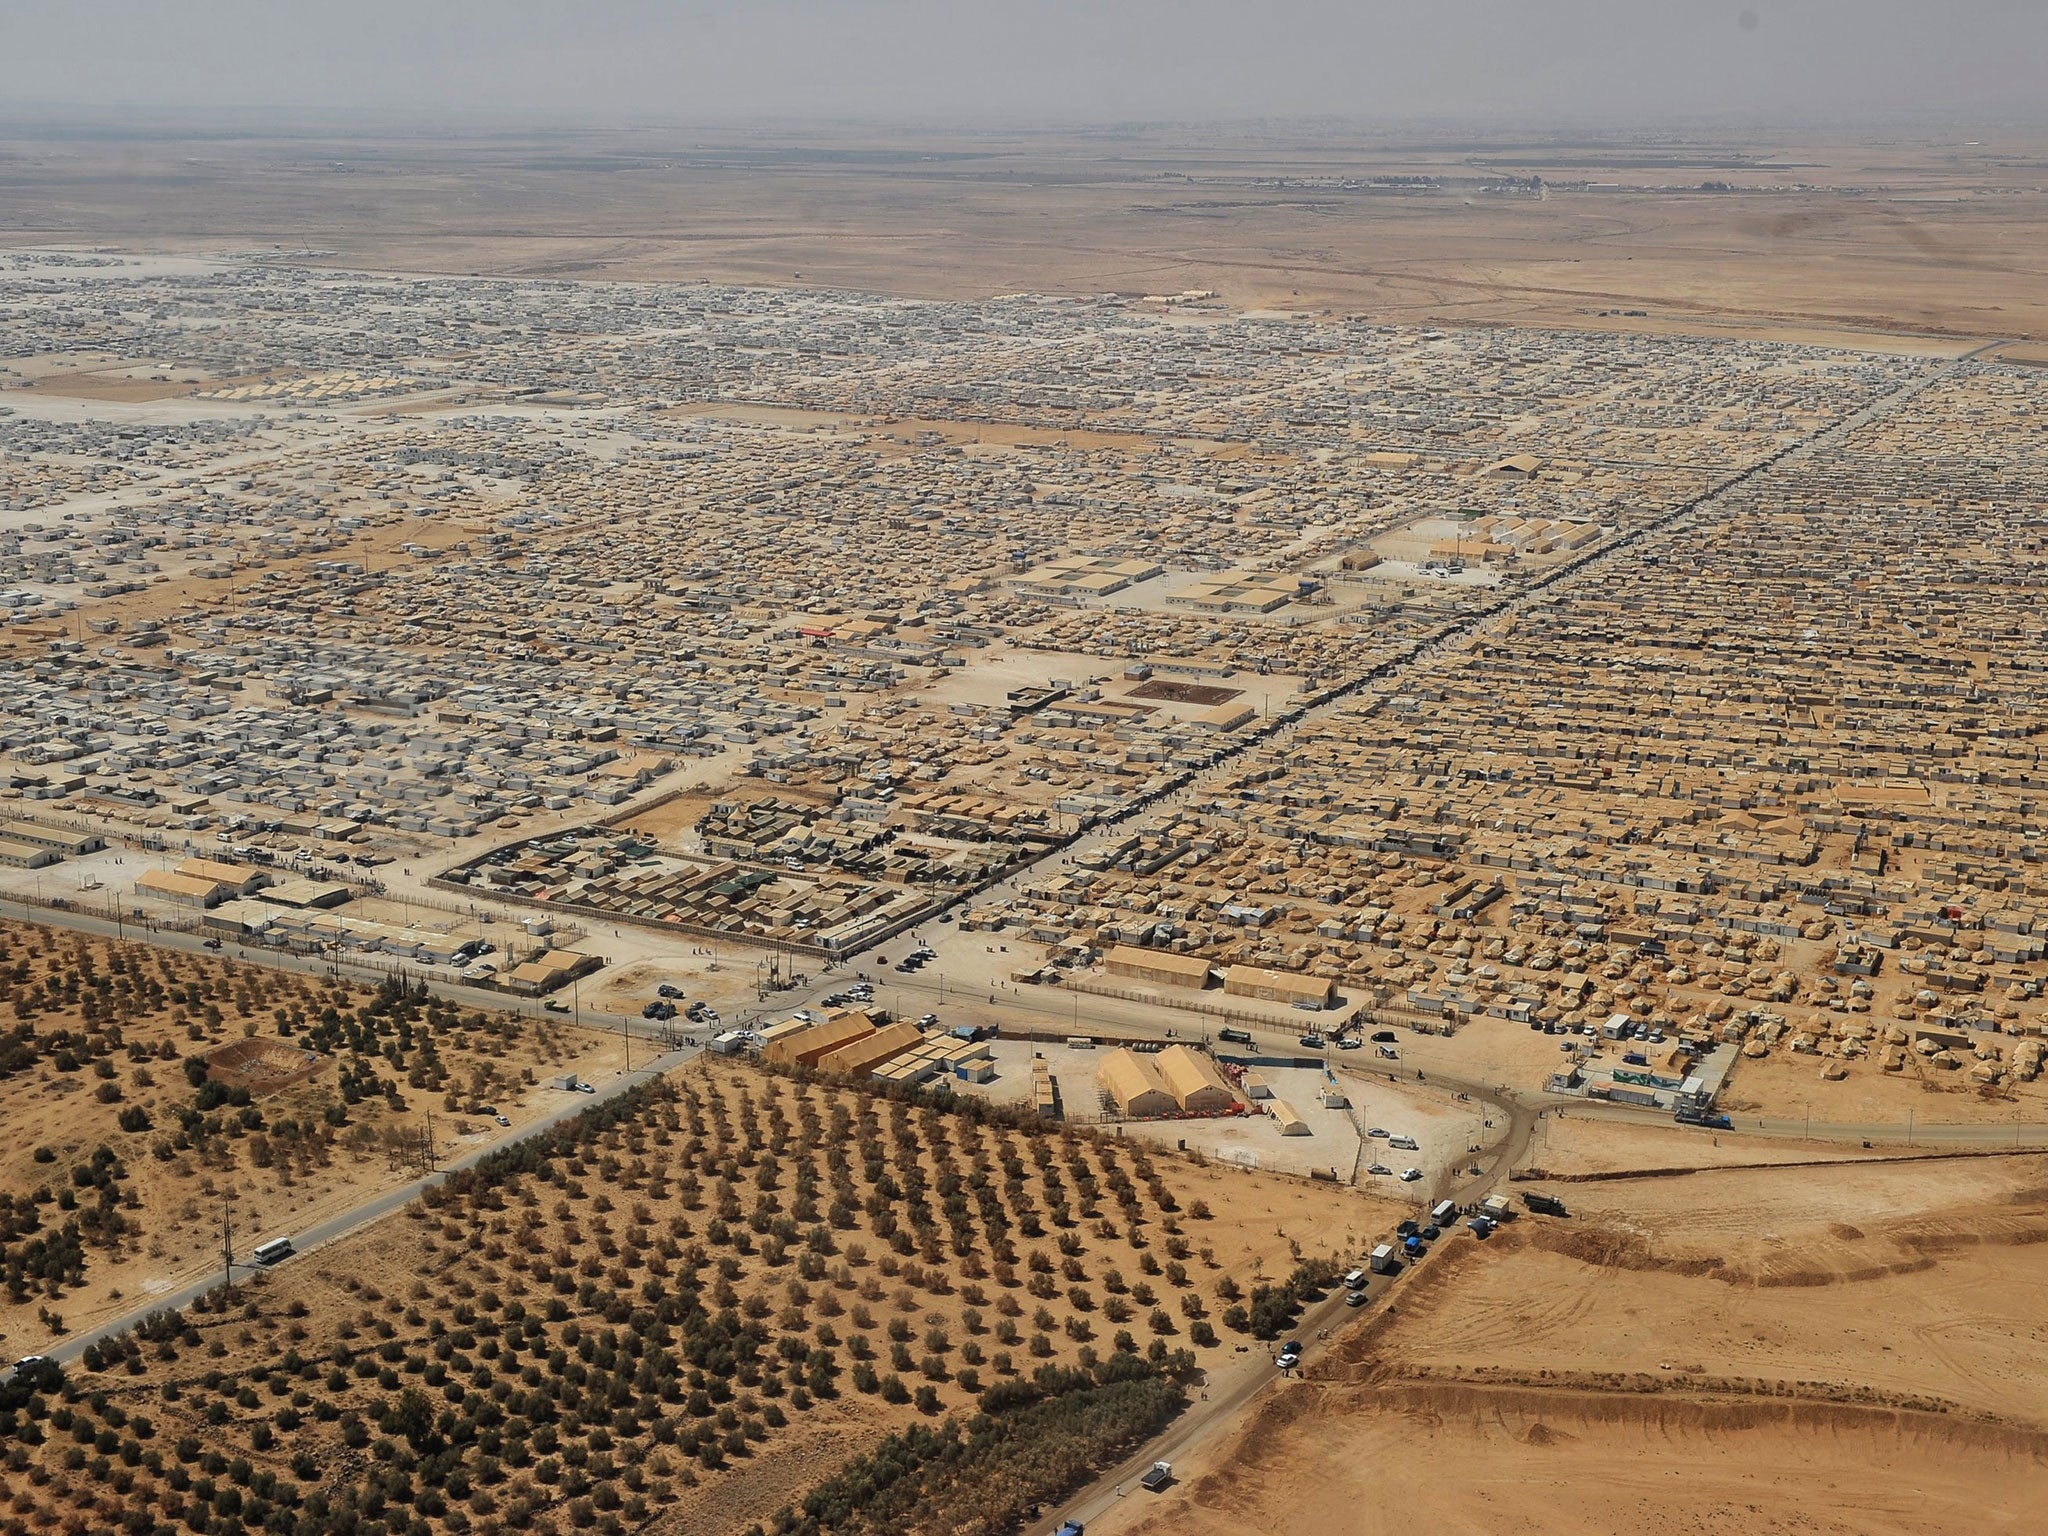 The Zaatari refugee camp near Mafraq, 8km from the Jordanian-Syrian border, is home to more than 80,000 Syrians